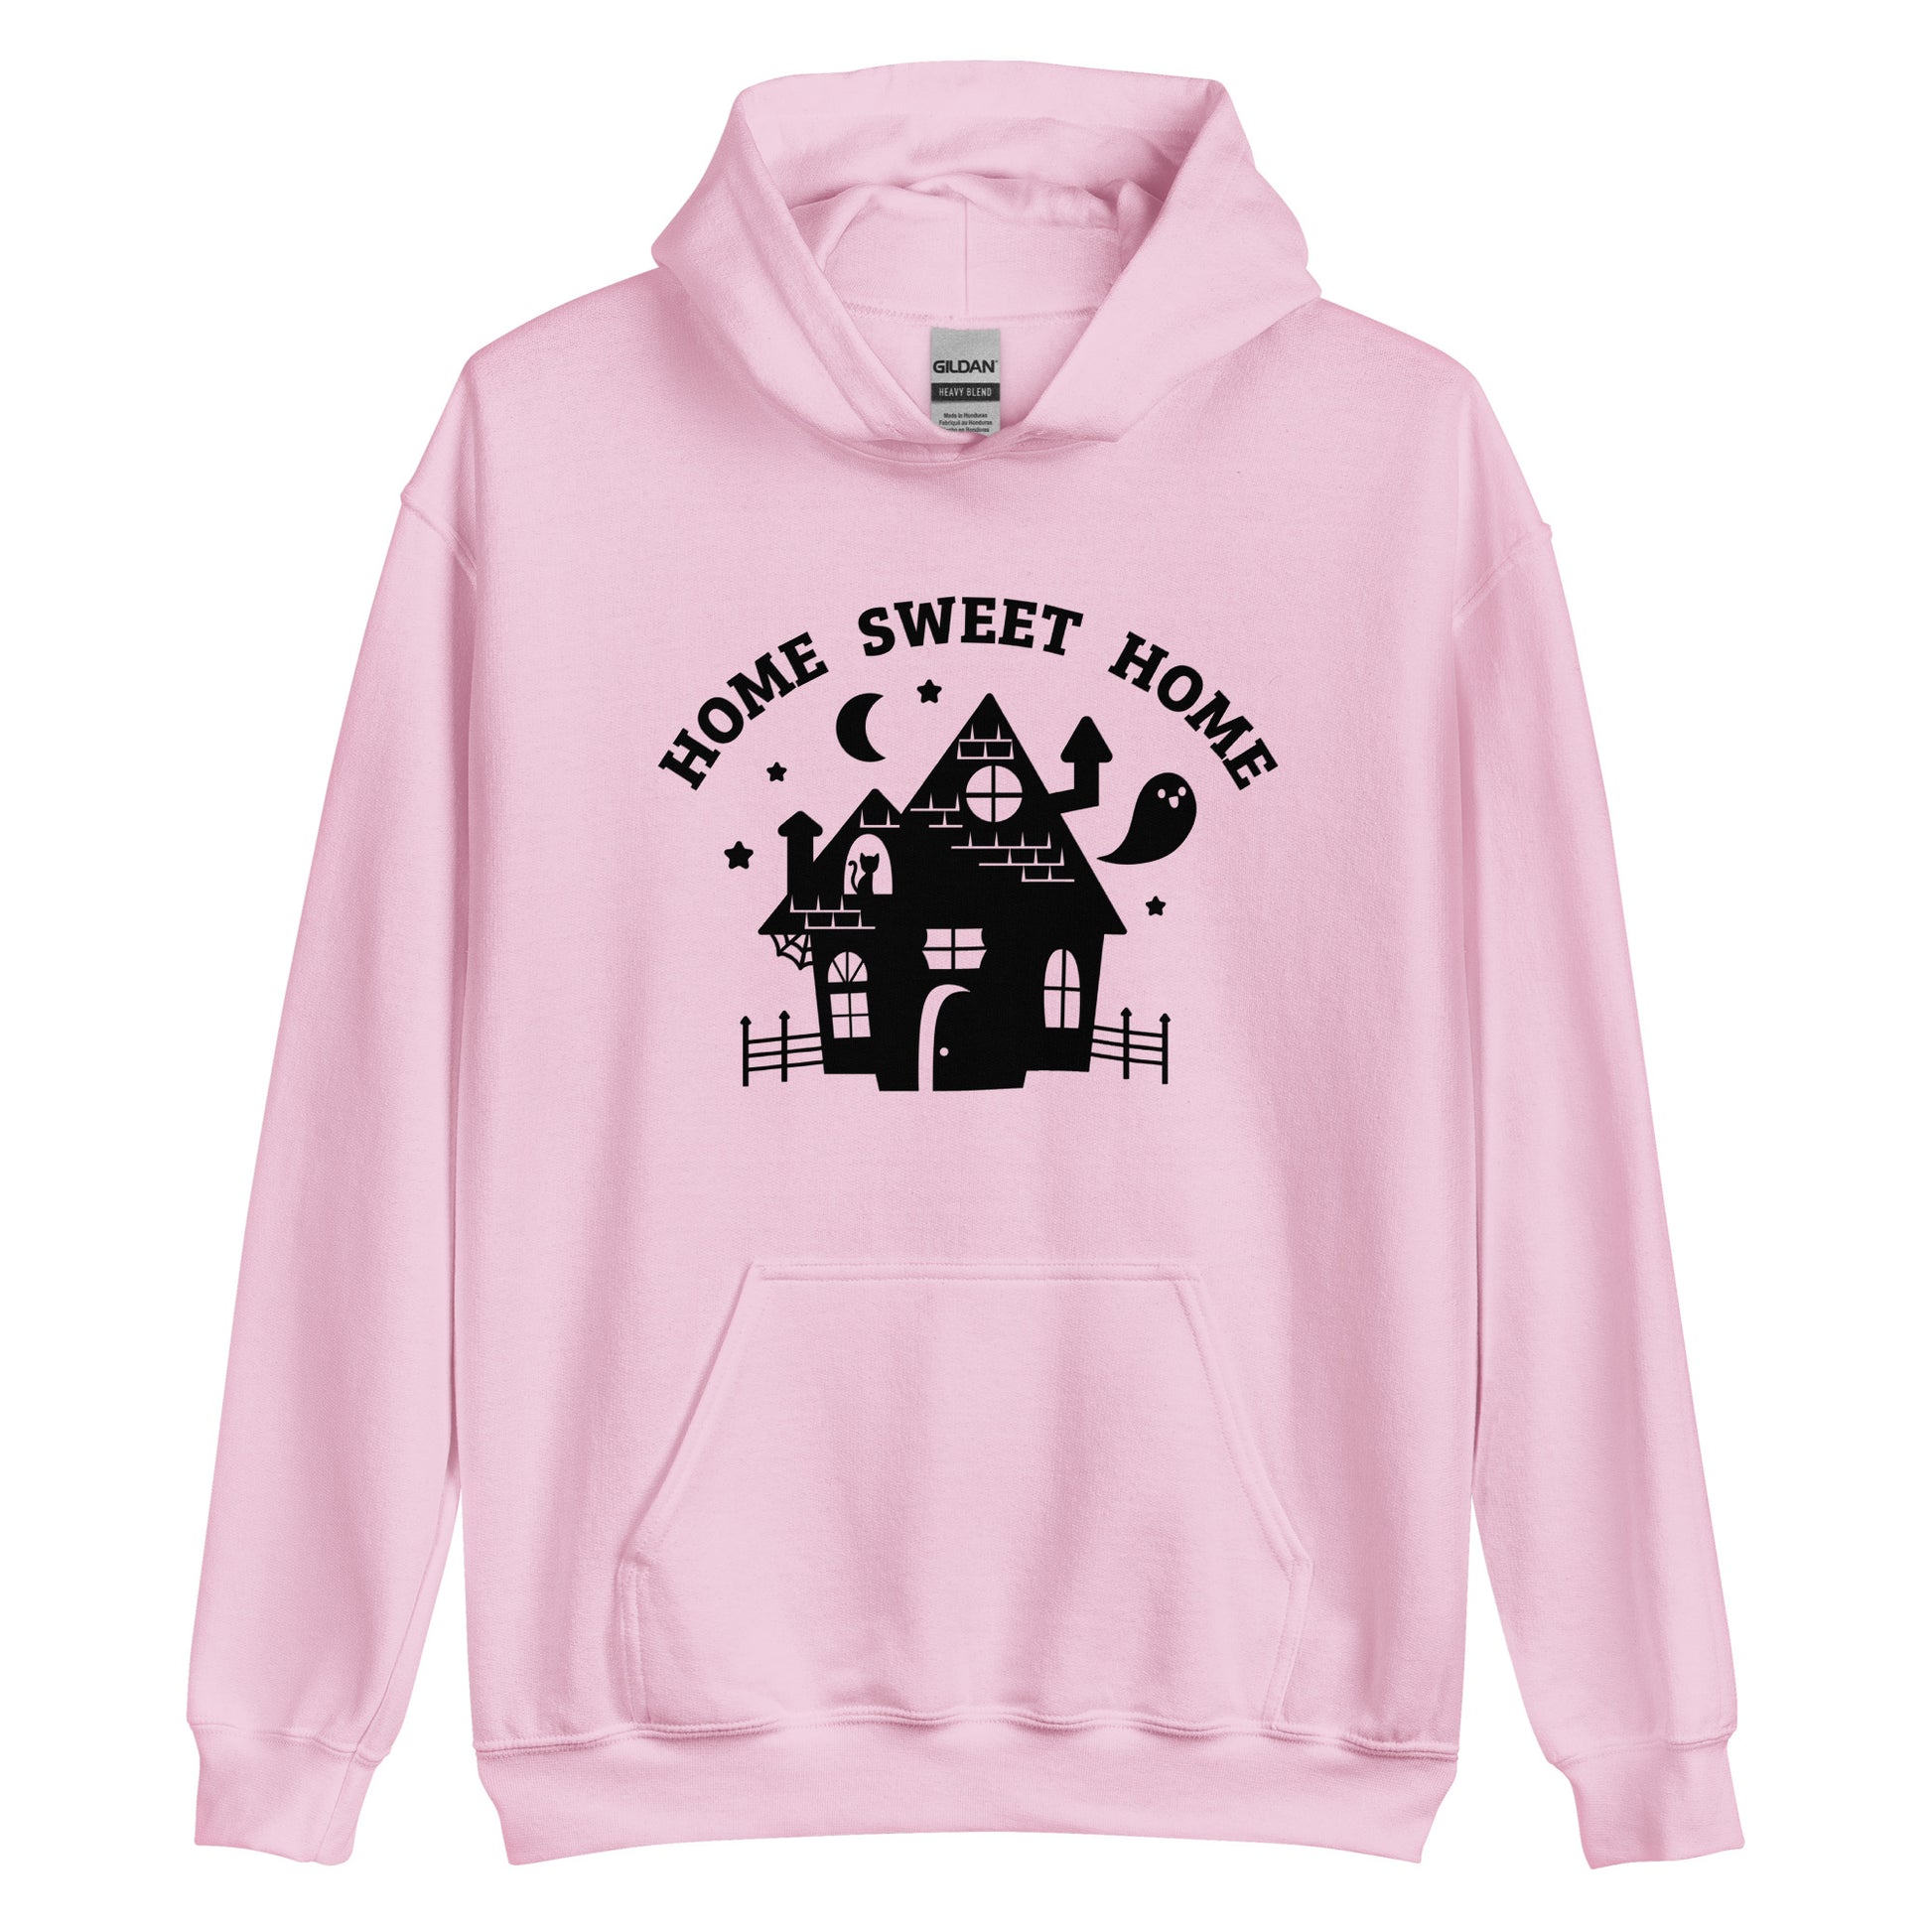 A pink hooded sweatshirt featuring a cutesy image of a haunted house. Text above the house reads "HOME SWEET HOME"